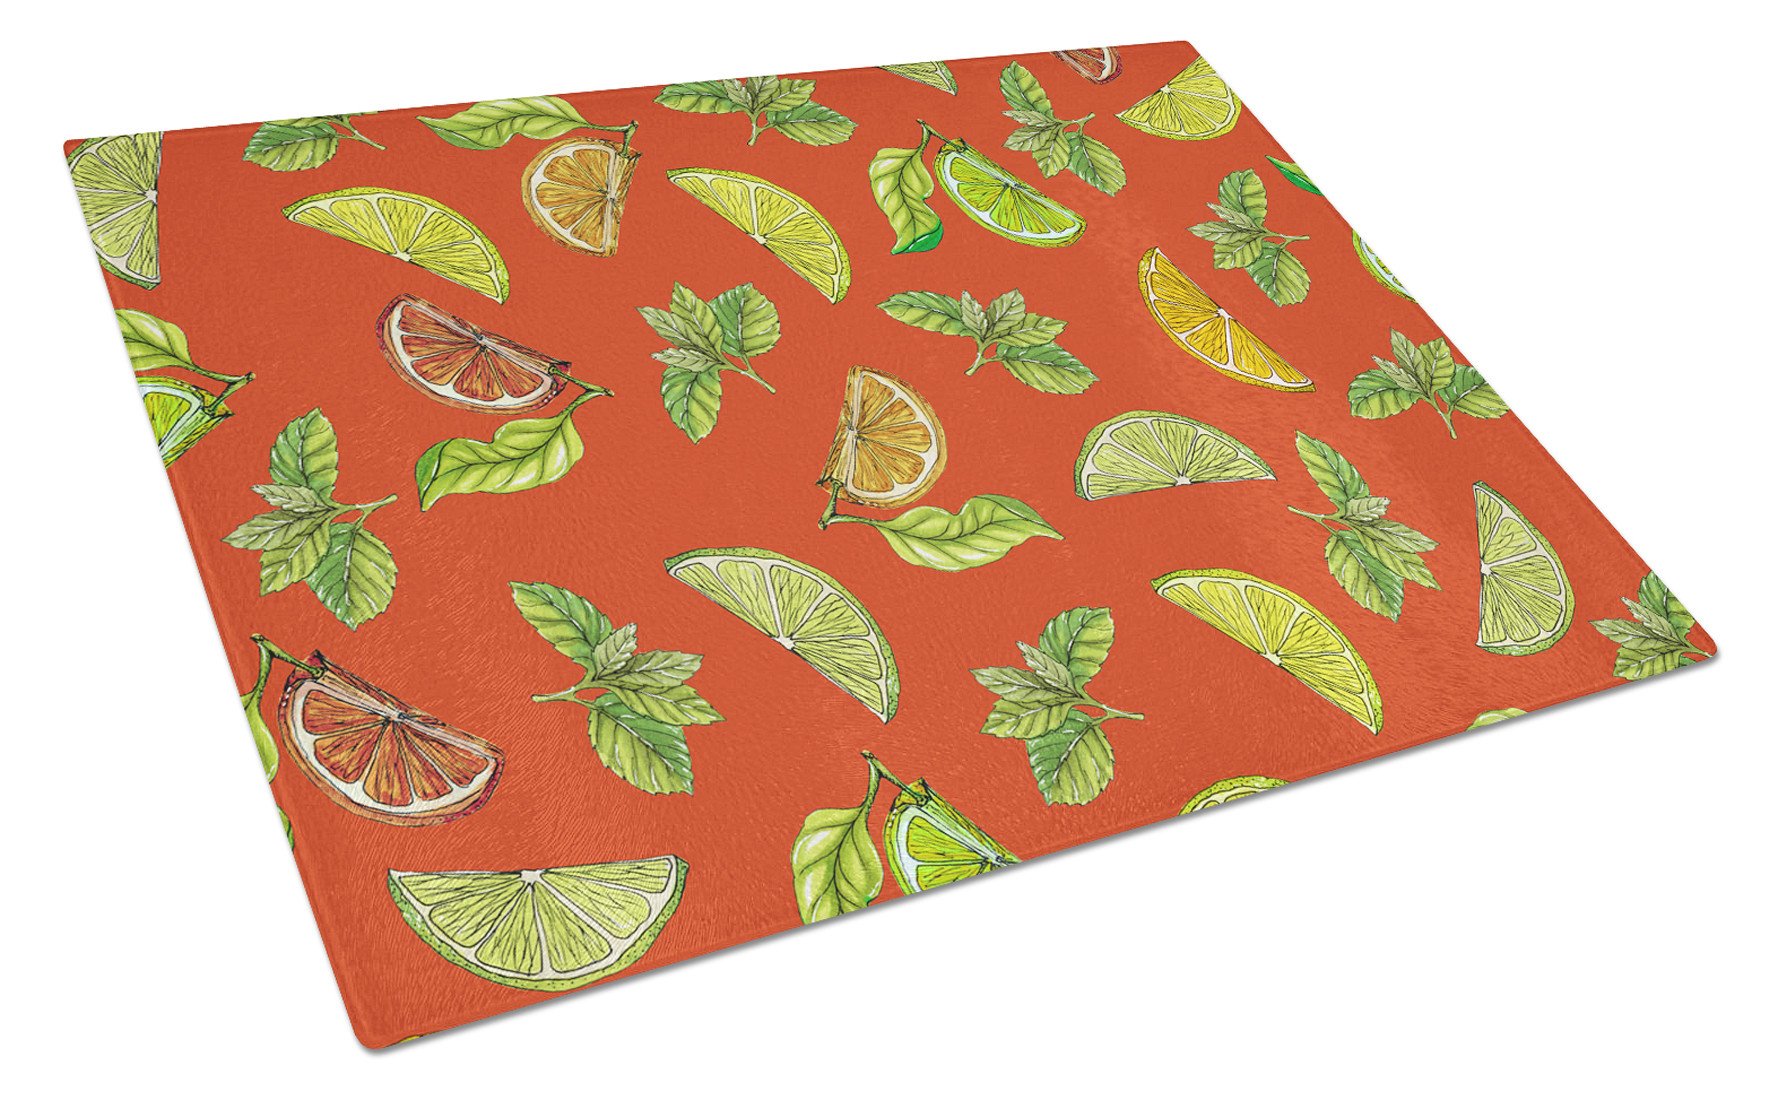 Lemons, Limes and Oranges Glass Cutting Board Large BB5205LCB by Caroline's Treasures